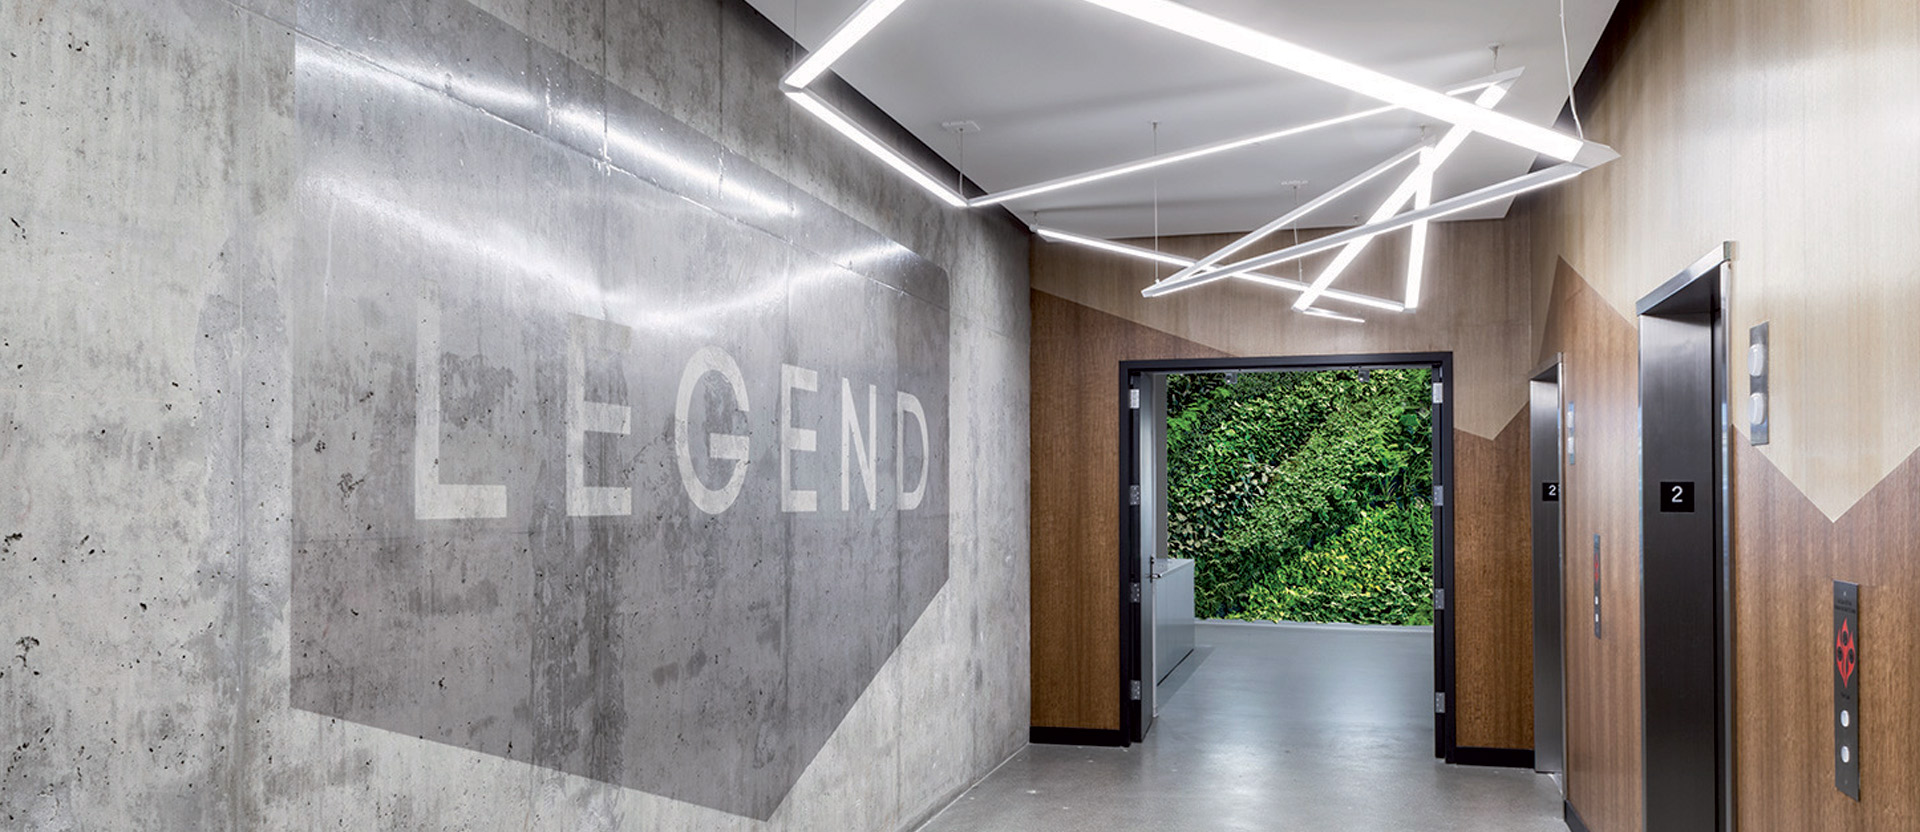 Modern hallway with geometric LED ceiling lights and polished concrete walls featuring a bold stenciled "LEGEND". Warm wooden doors contrast with the industrial aesthetics, complemented by a lush living green wall at the end of the corridor.